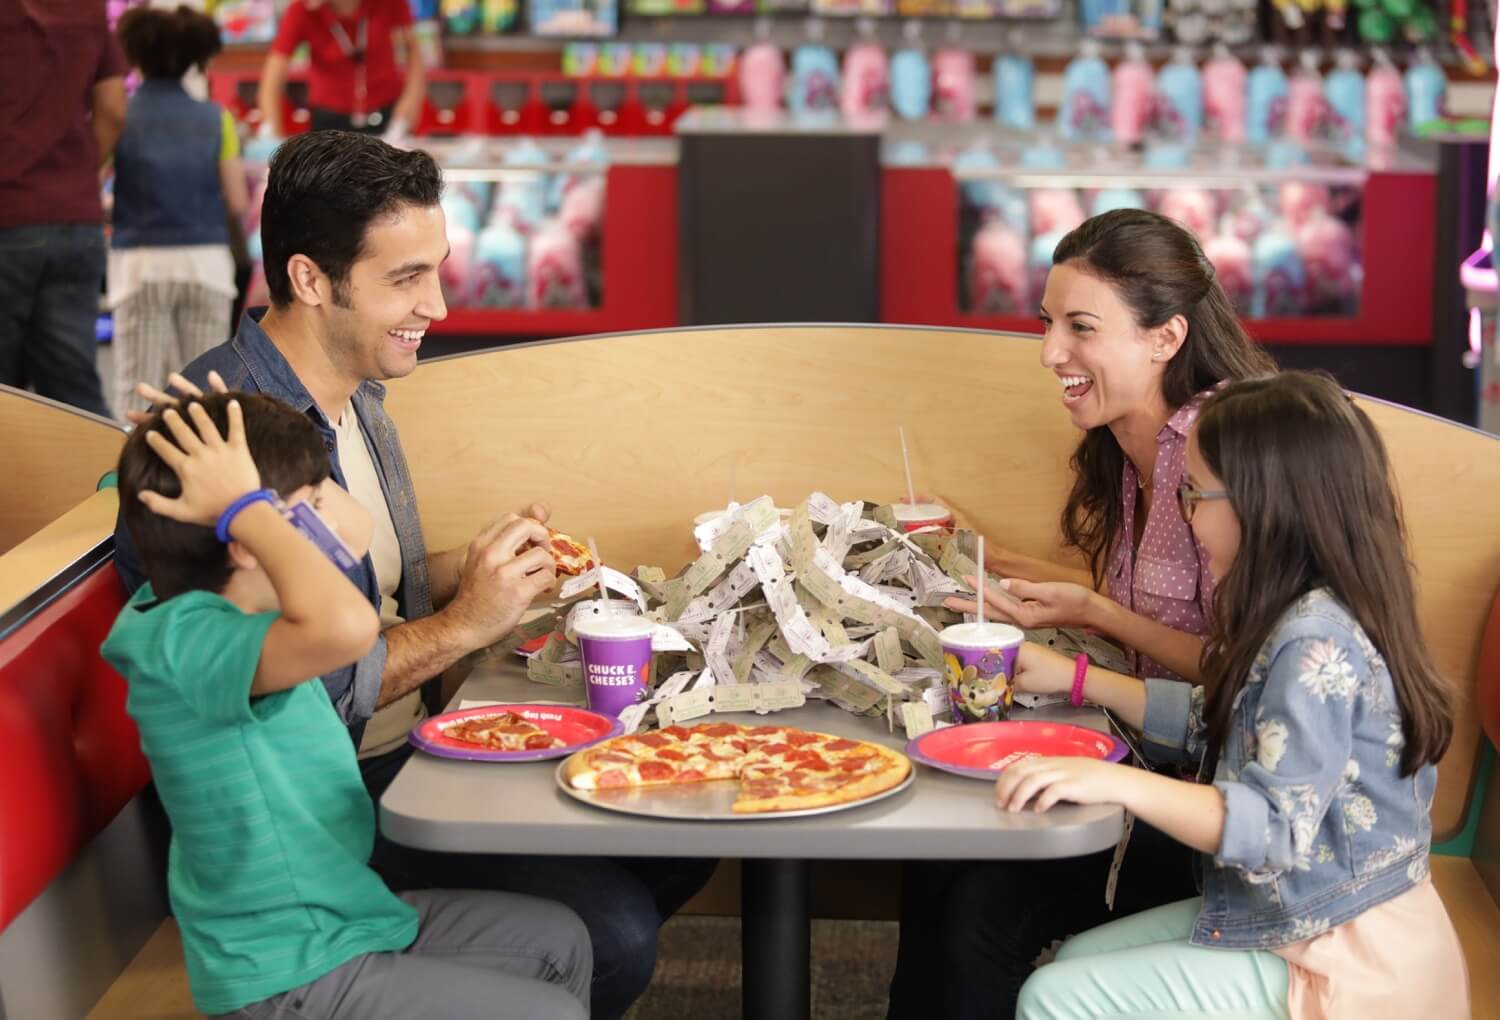 Family eating pizza with tickets on the table